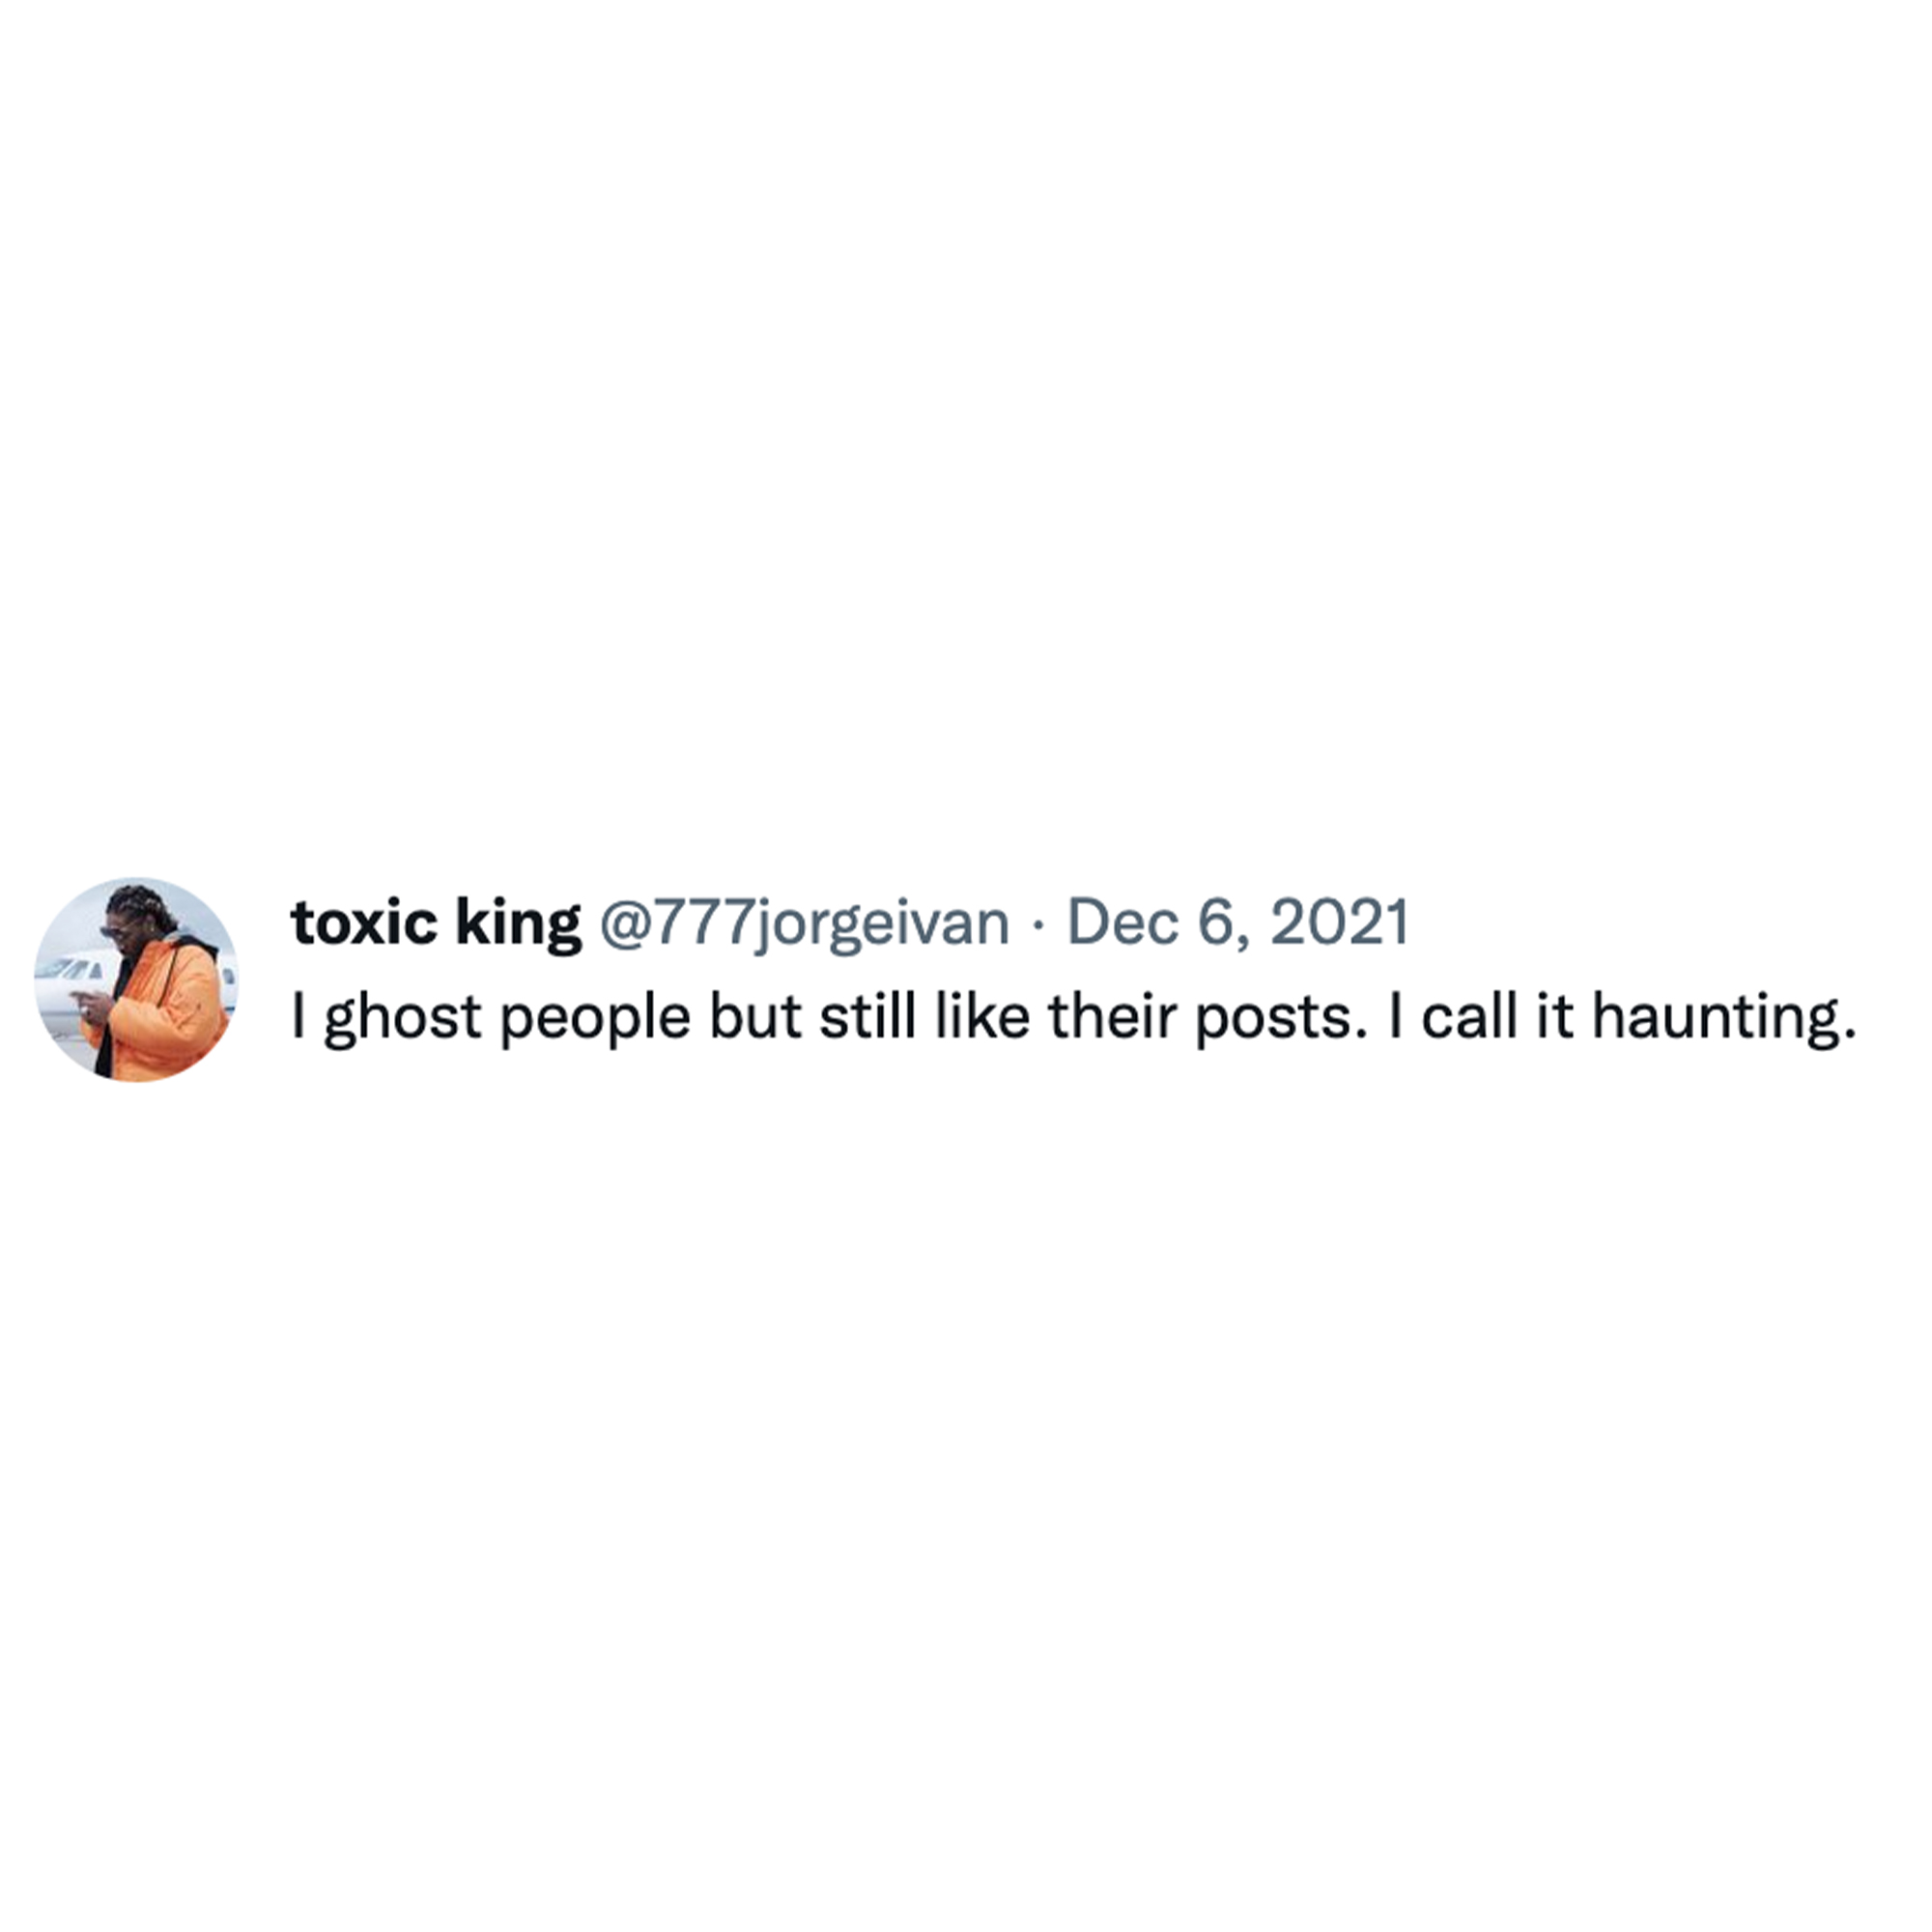 Toxic Memes and Tweets - toxic king I ghost people but still their posts. I call it haunting.